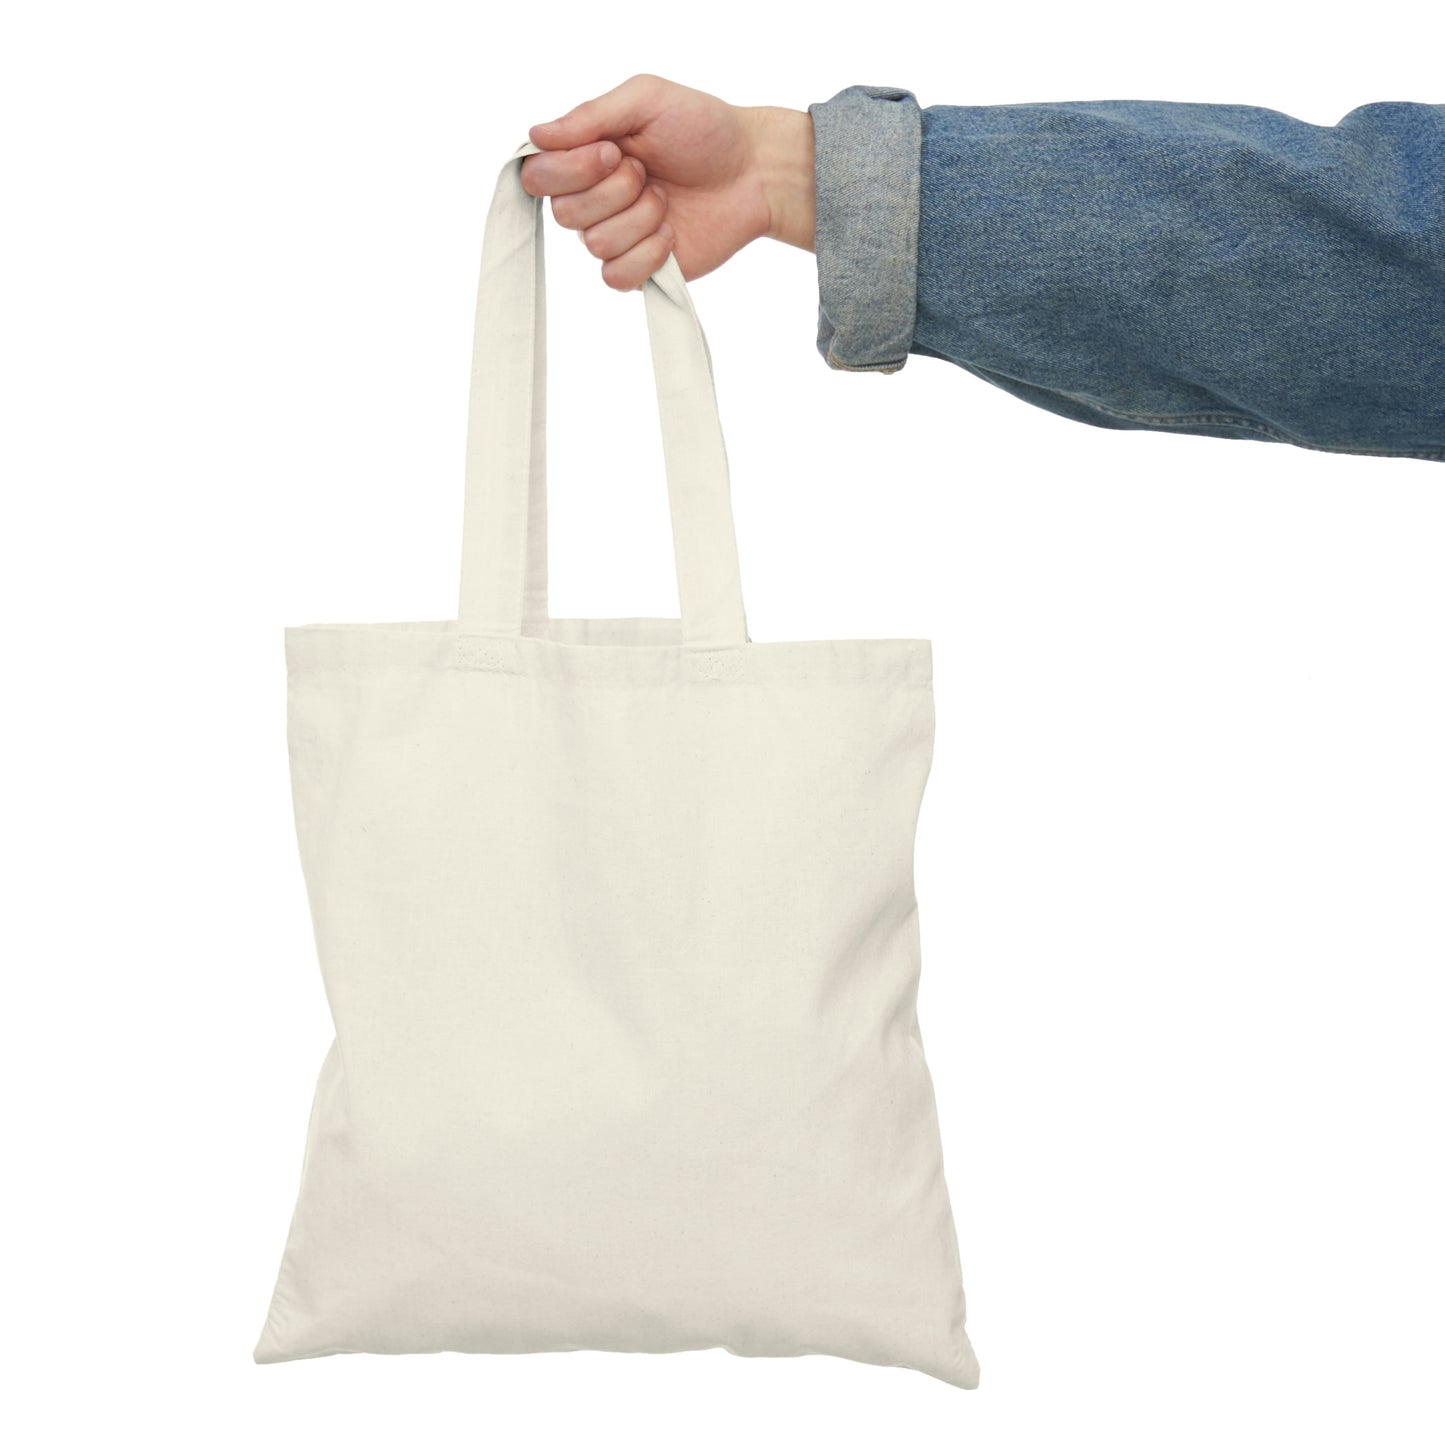 The Irish Kleptomaniac and other Gems - Natural Tote Bag